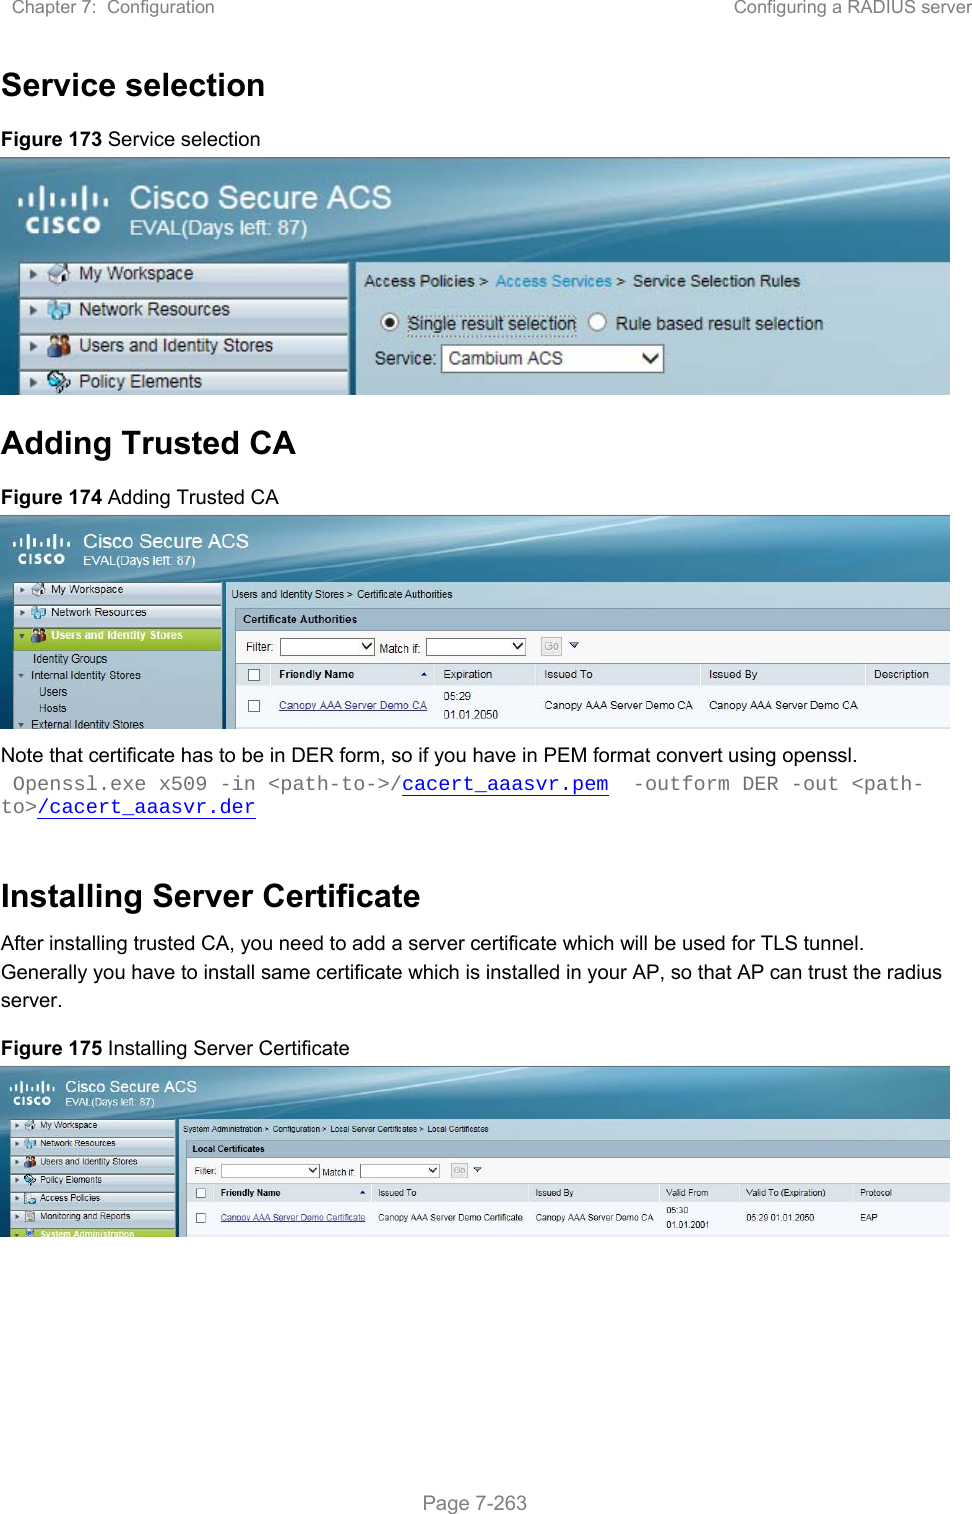 Chapter 7:  Configuration  Configuring a RADIUS server   Page 7-263 Service selection Figure 173 Service selection  Adding Trusted CA Figure 174 Adding Trusted CA  Note that certificate has to be in DER form, so if you have in PEM format convert using openssl.  Openssl.exe x509 -in &lt;path-to-&gt;/cacert_aaasvr.pem  -outform DER -out &lt;path-to&gt;/cacert_aaasvr.der  Installing Server Certificate After installing trusted CA, you need to add a server certificate which will be used for TLS tunnel. Generally you have to install same certificate which is installed in your AP, so that AP can trust the radius server. Figure 175 Installing Server Certificate    